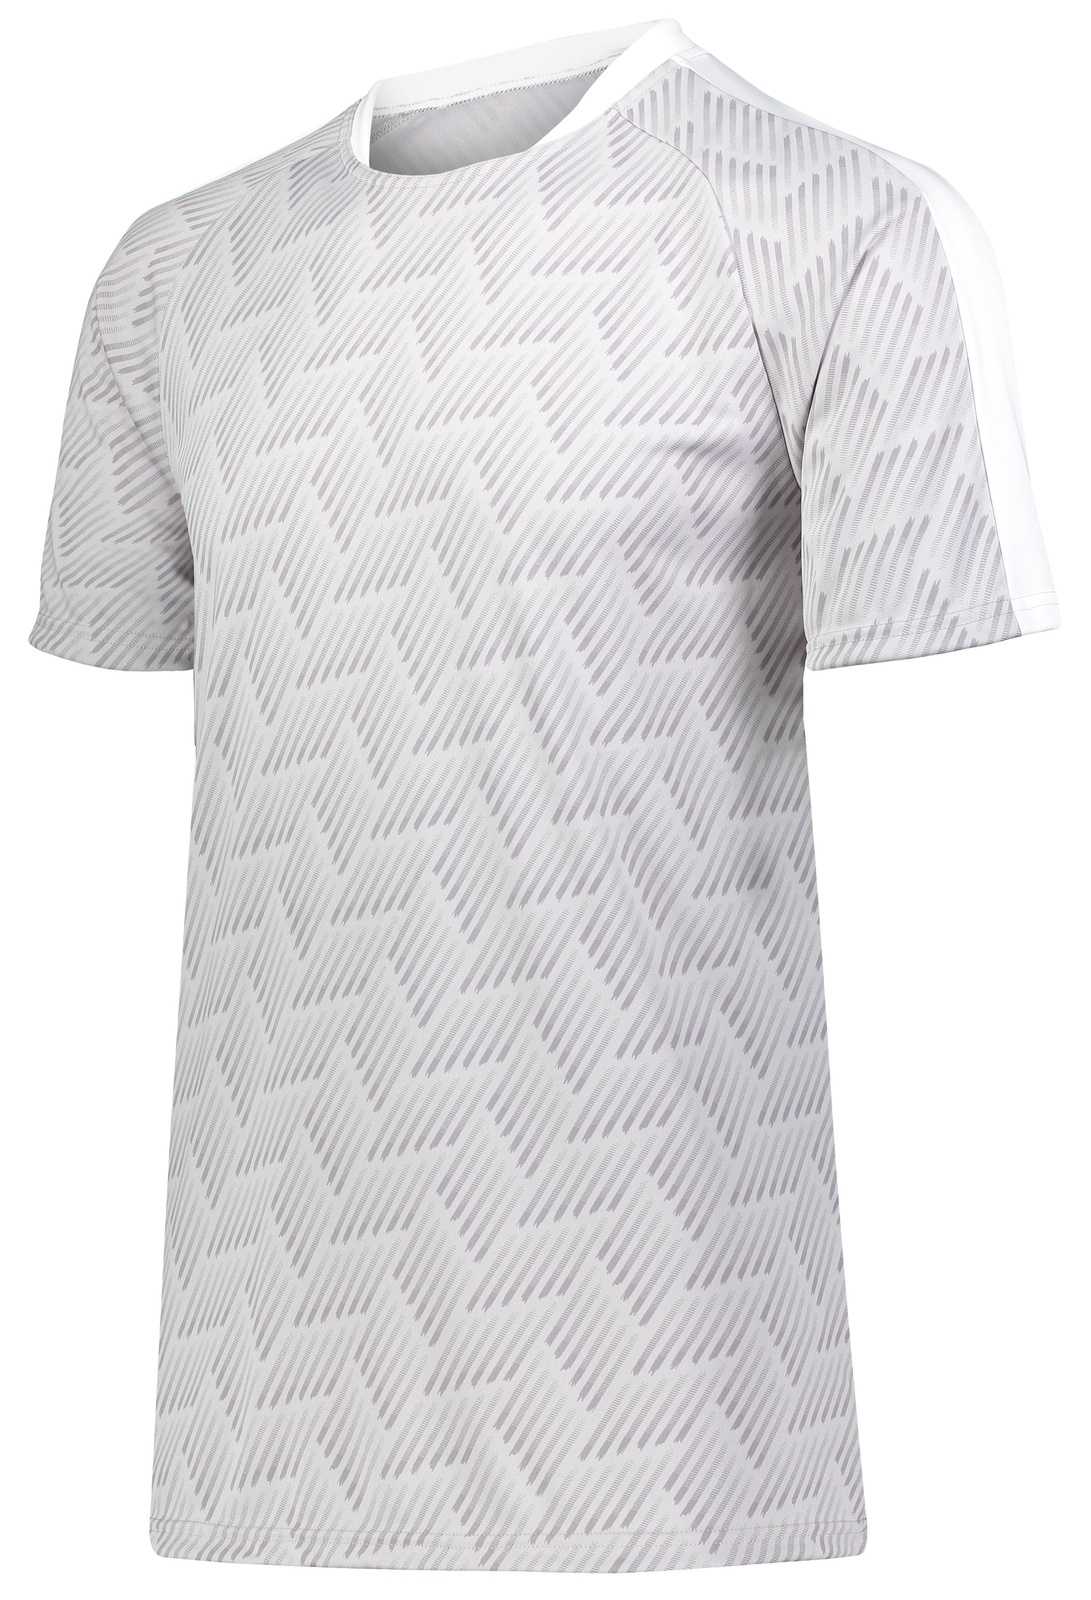 High Five 322981 Youth Hypervolt Jersey - Graphite Print White - HIT a Double